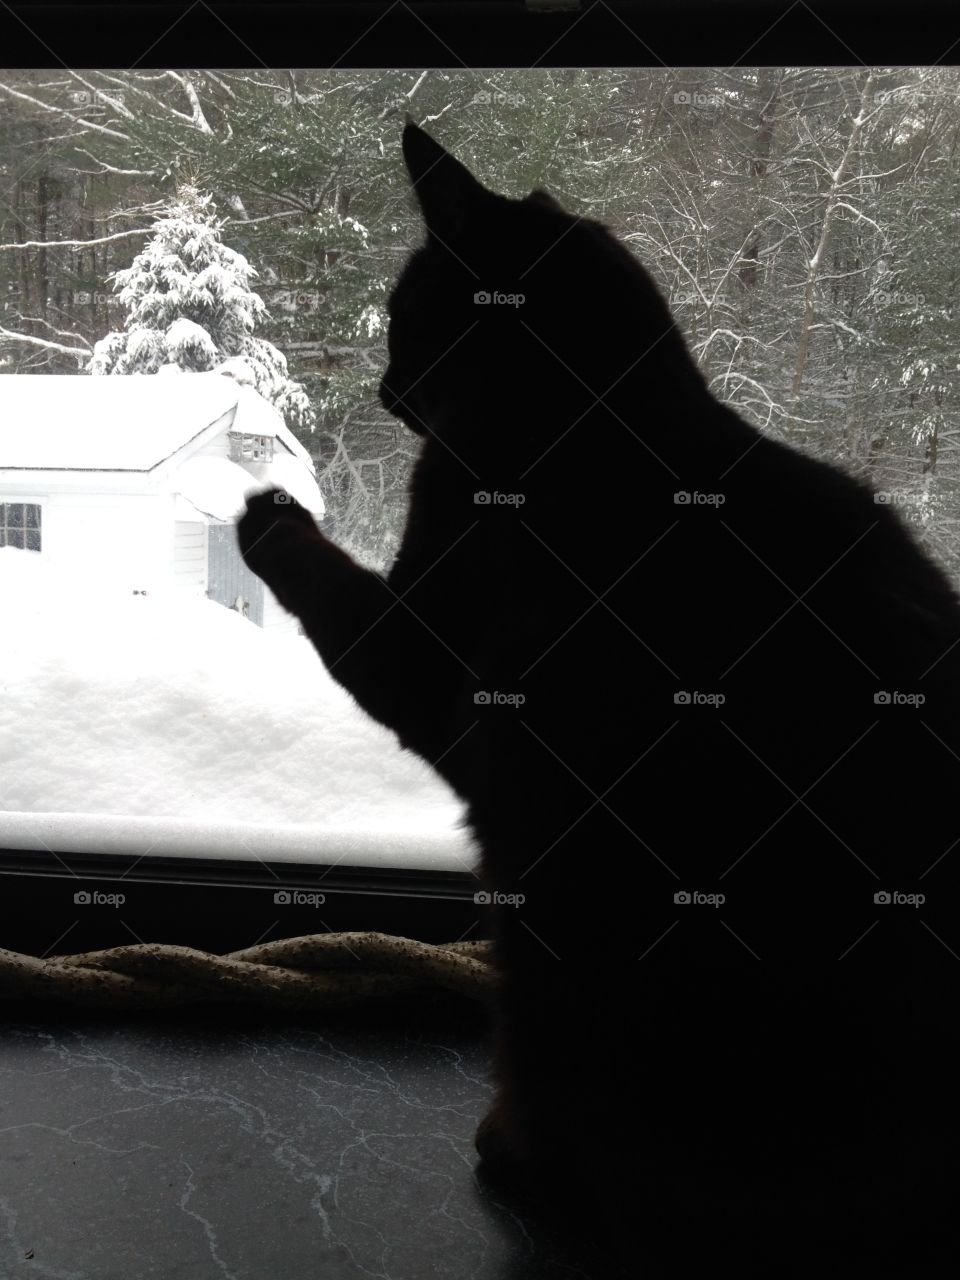 Black cat asking to go out into snowstorm.